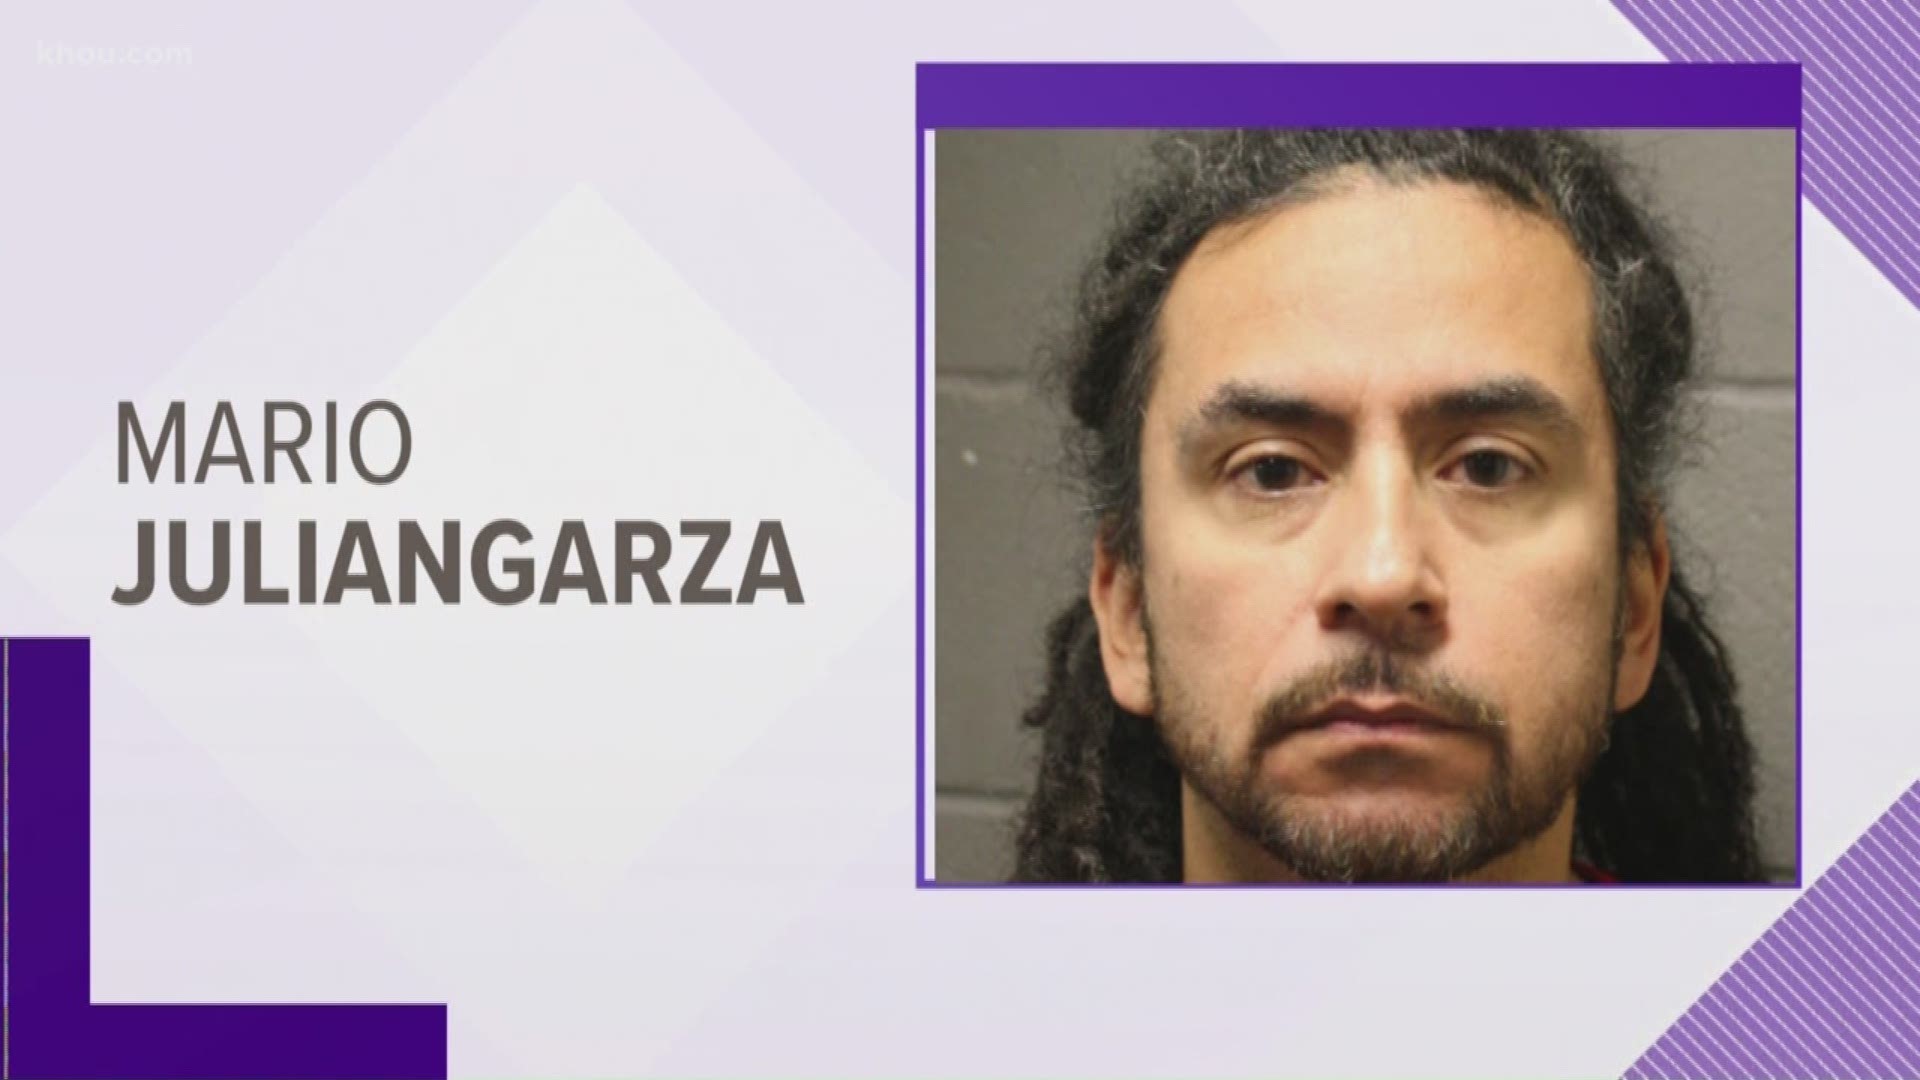 Mario Alonzo Juliangarza, 45, is accused of touching the student in a sexual manner while in his office. According to court documents, the girl told investigators Juliangarza would tell her he would have wet dreams about  her.